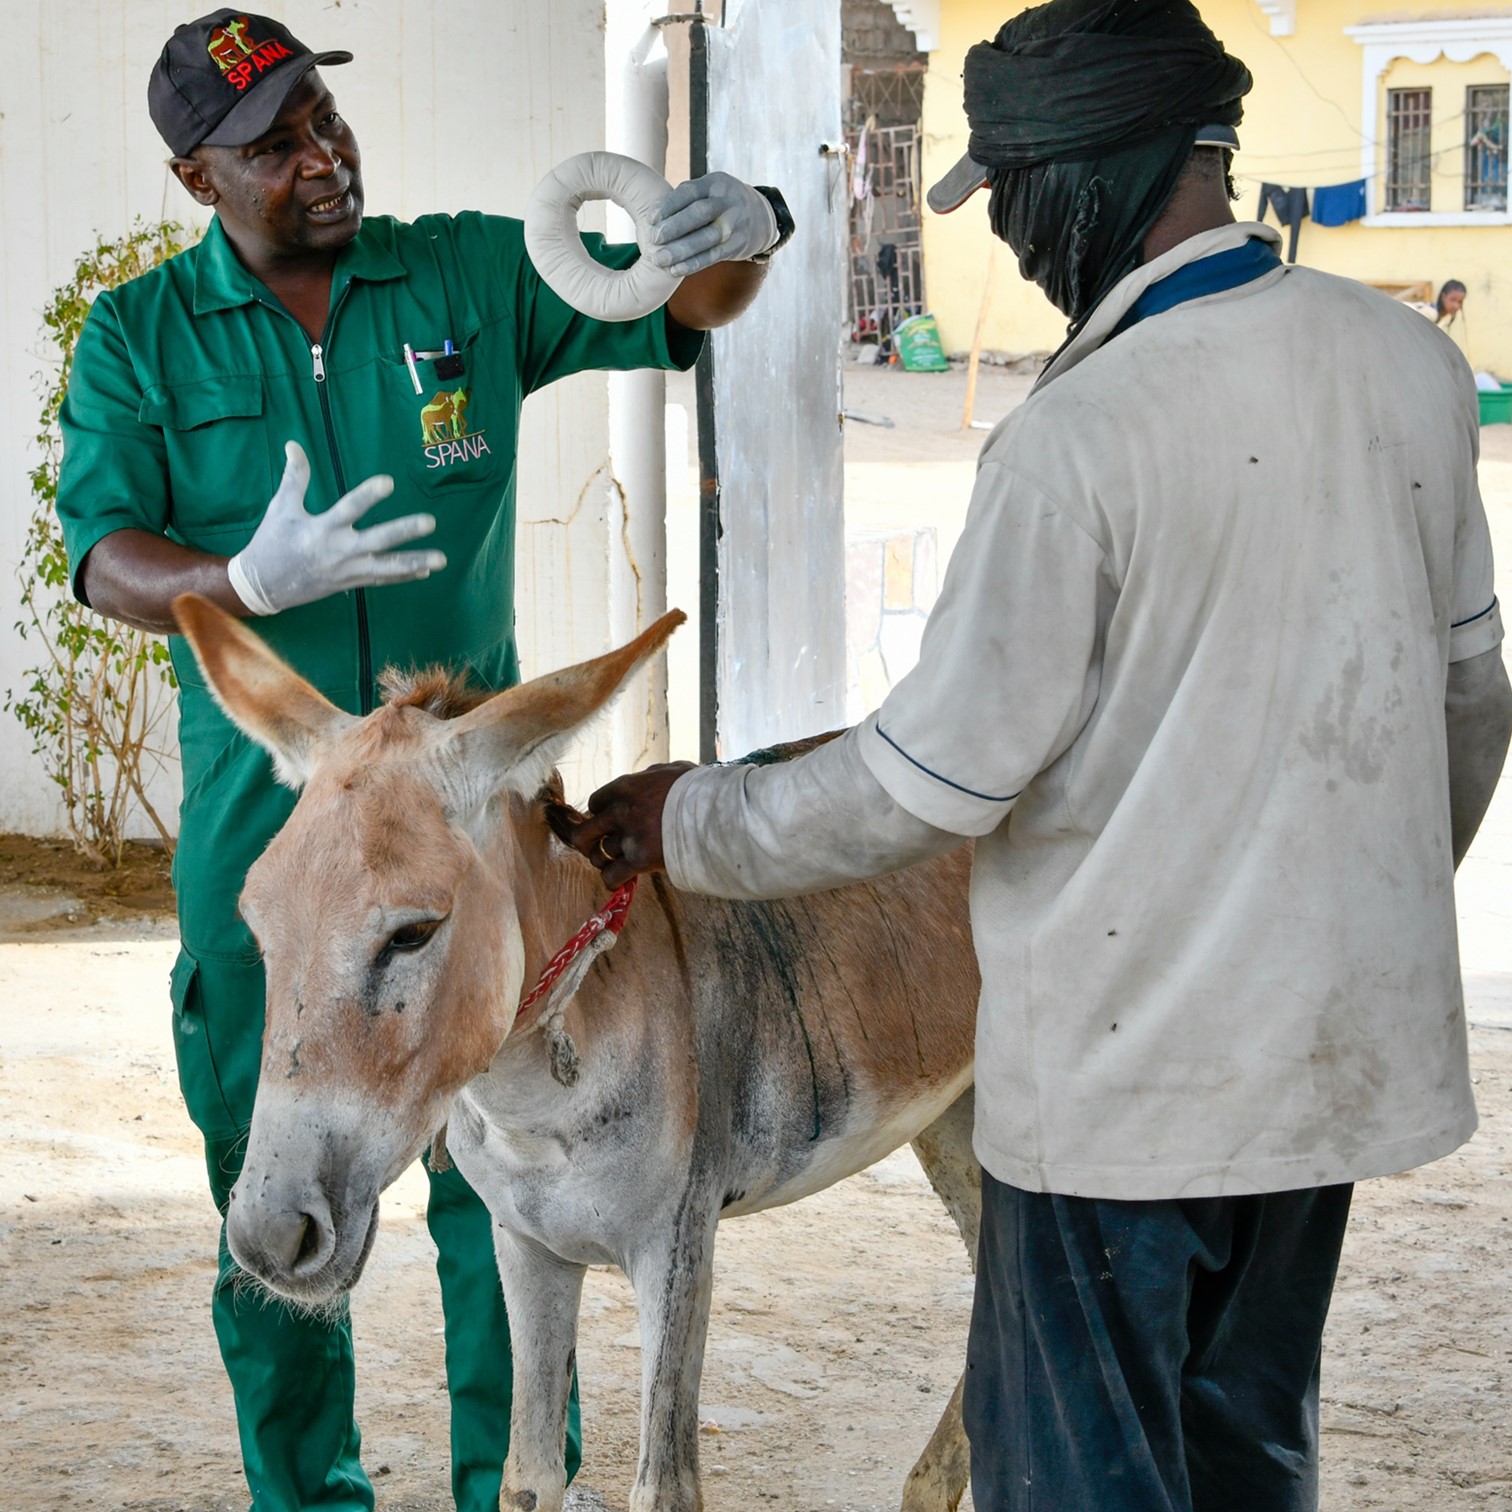 Owner being shown how to apply doughnut bandage and donkey